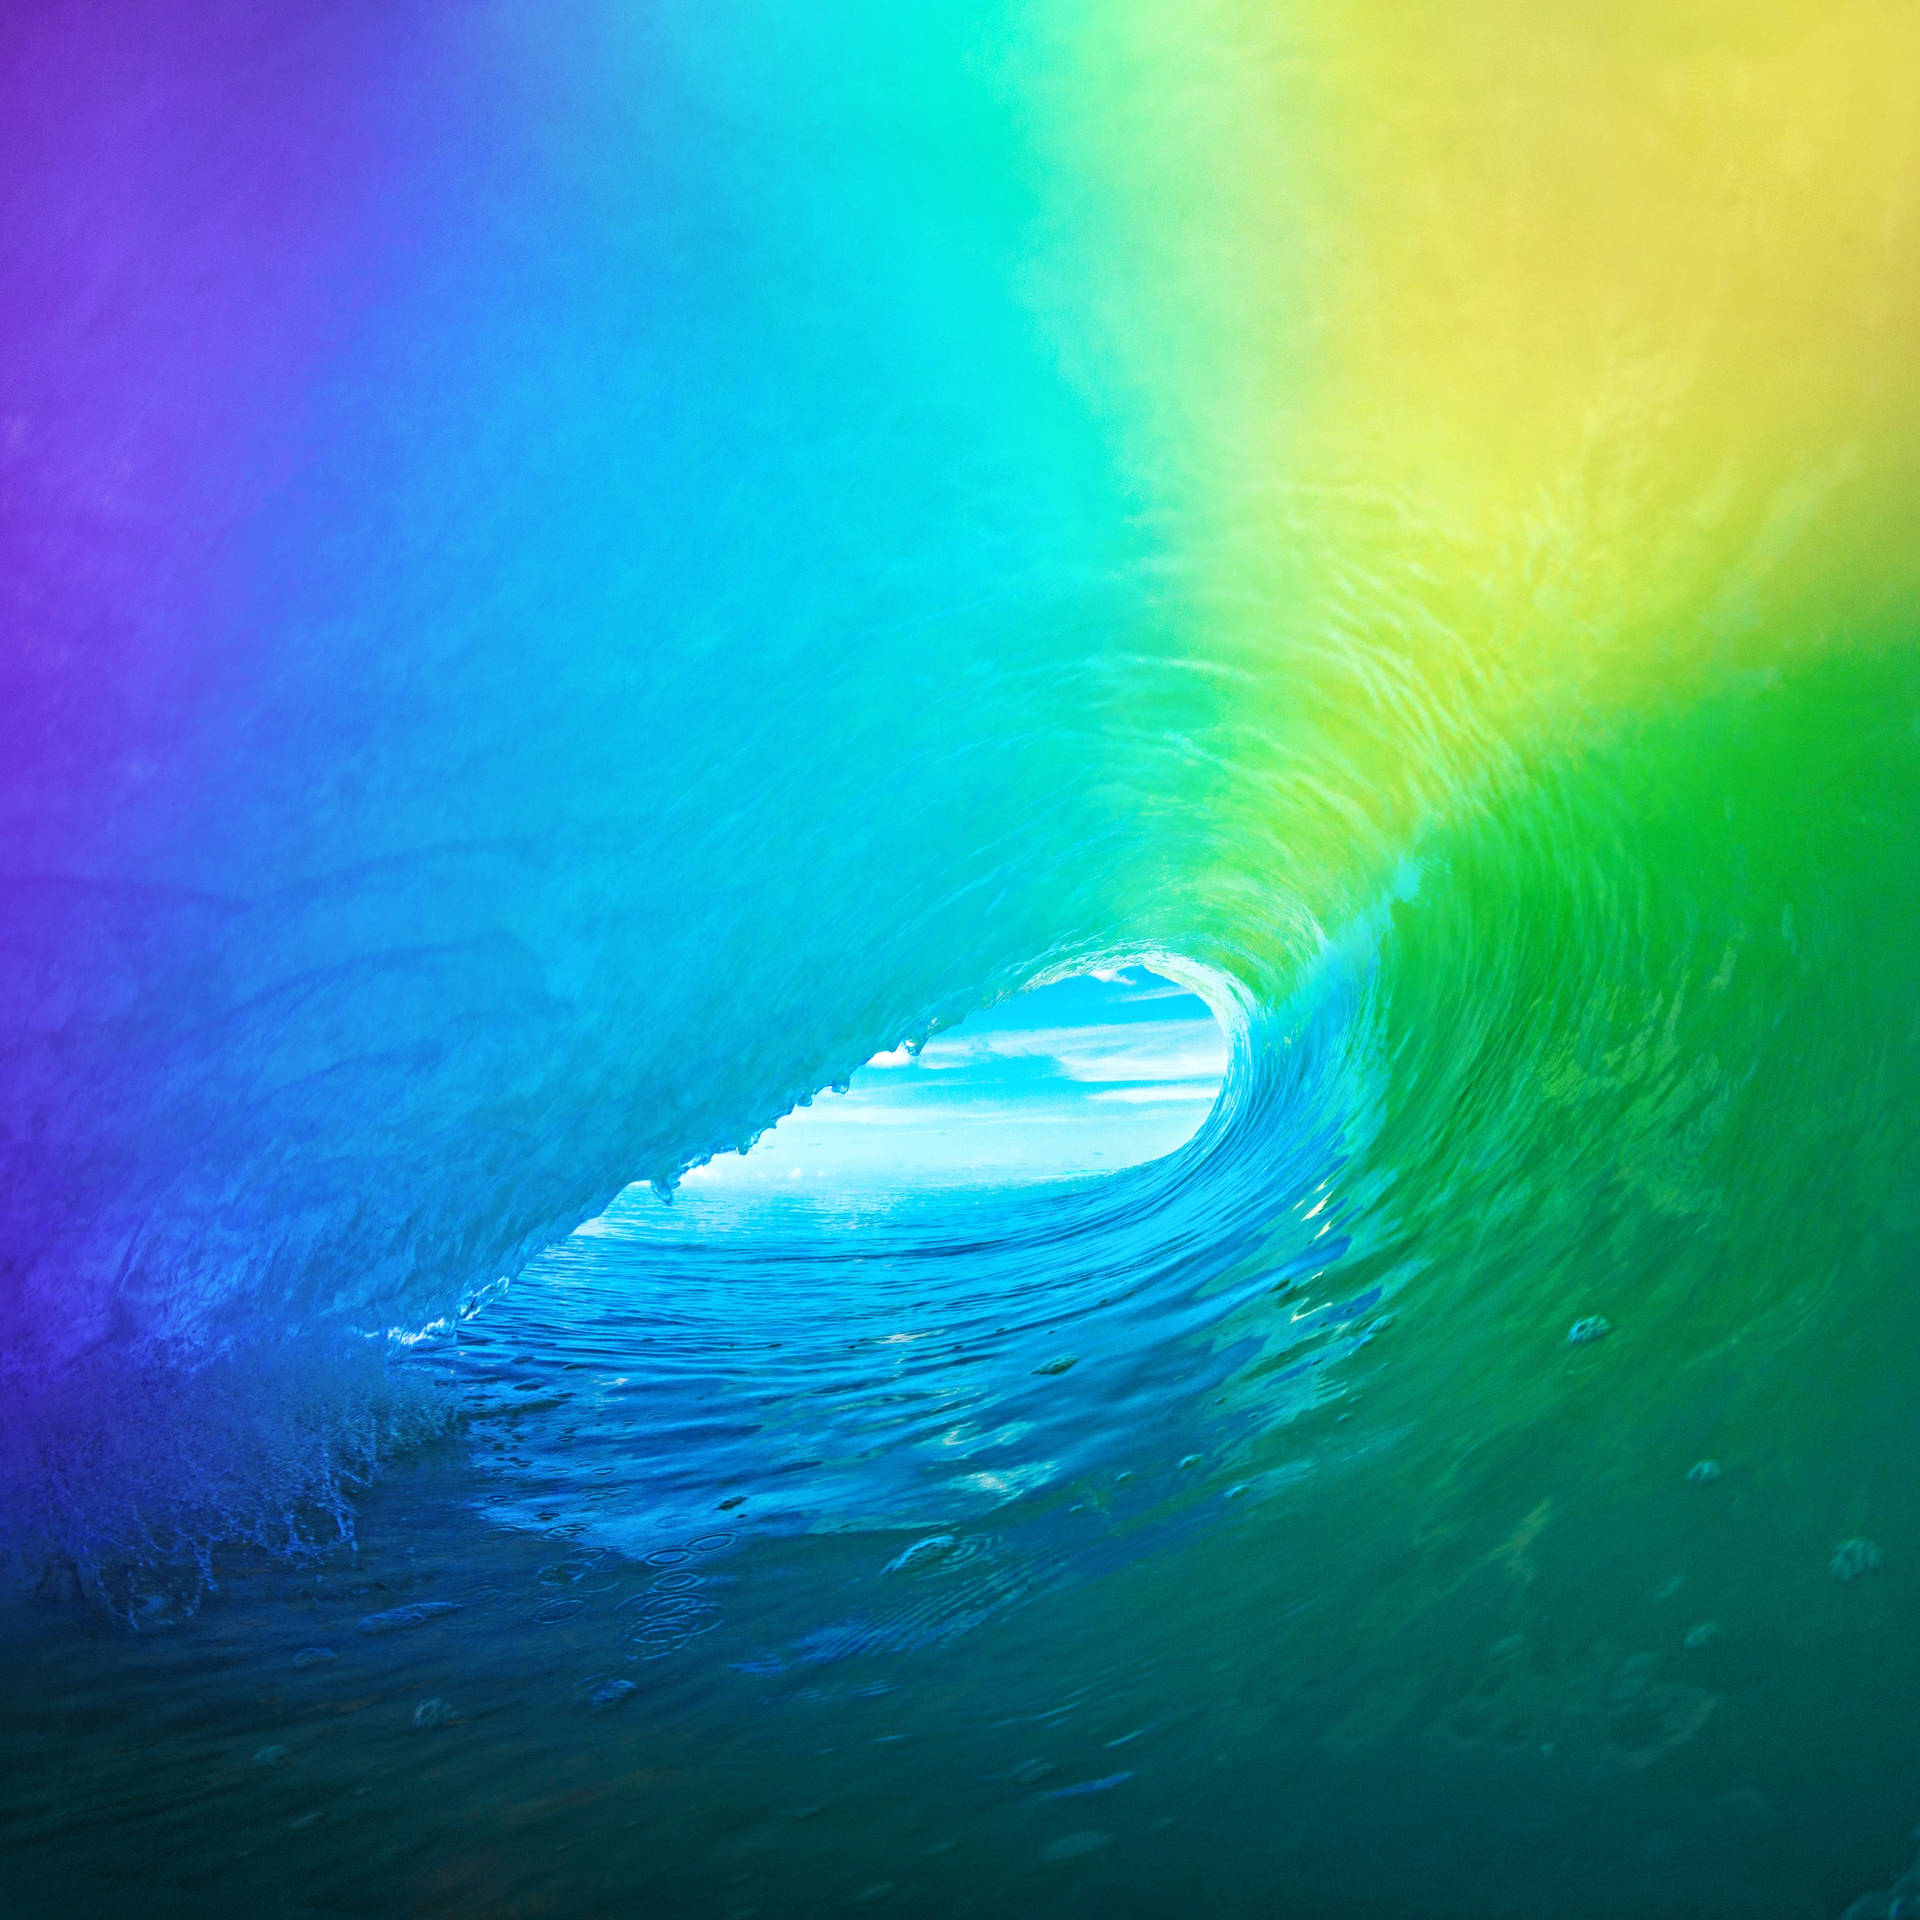 Colorful Wave Ipad Air 4 Background